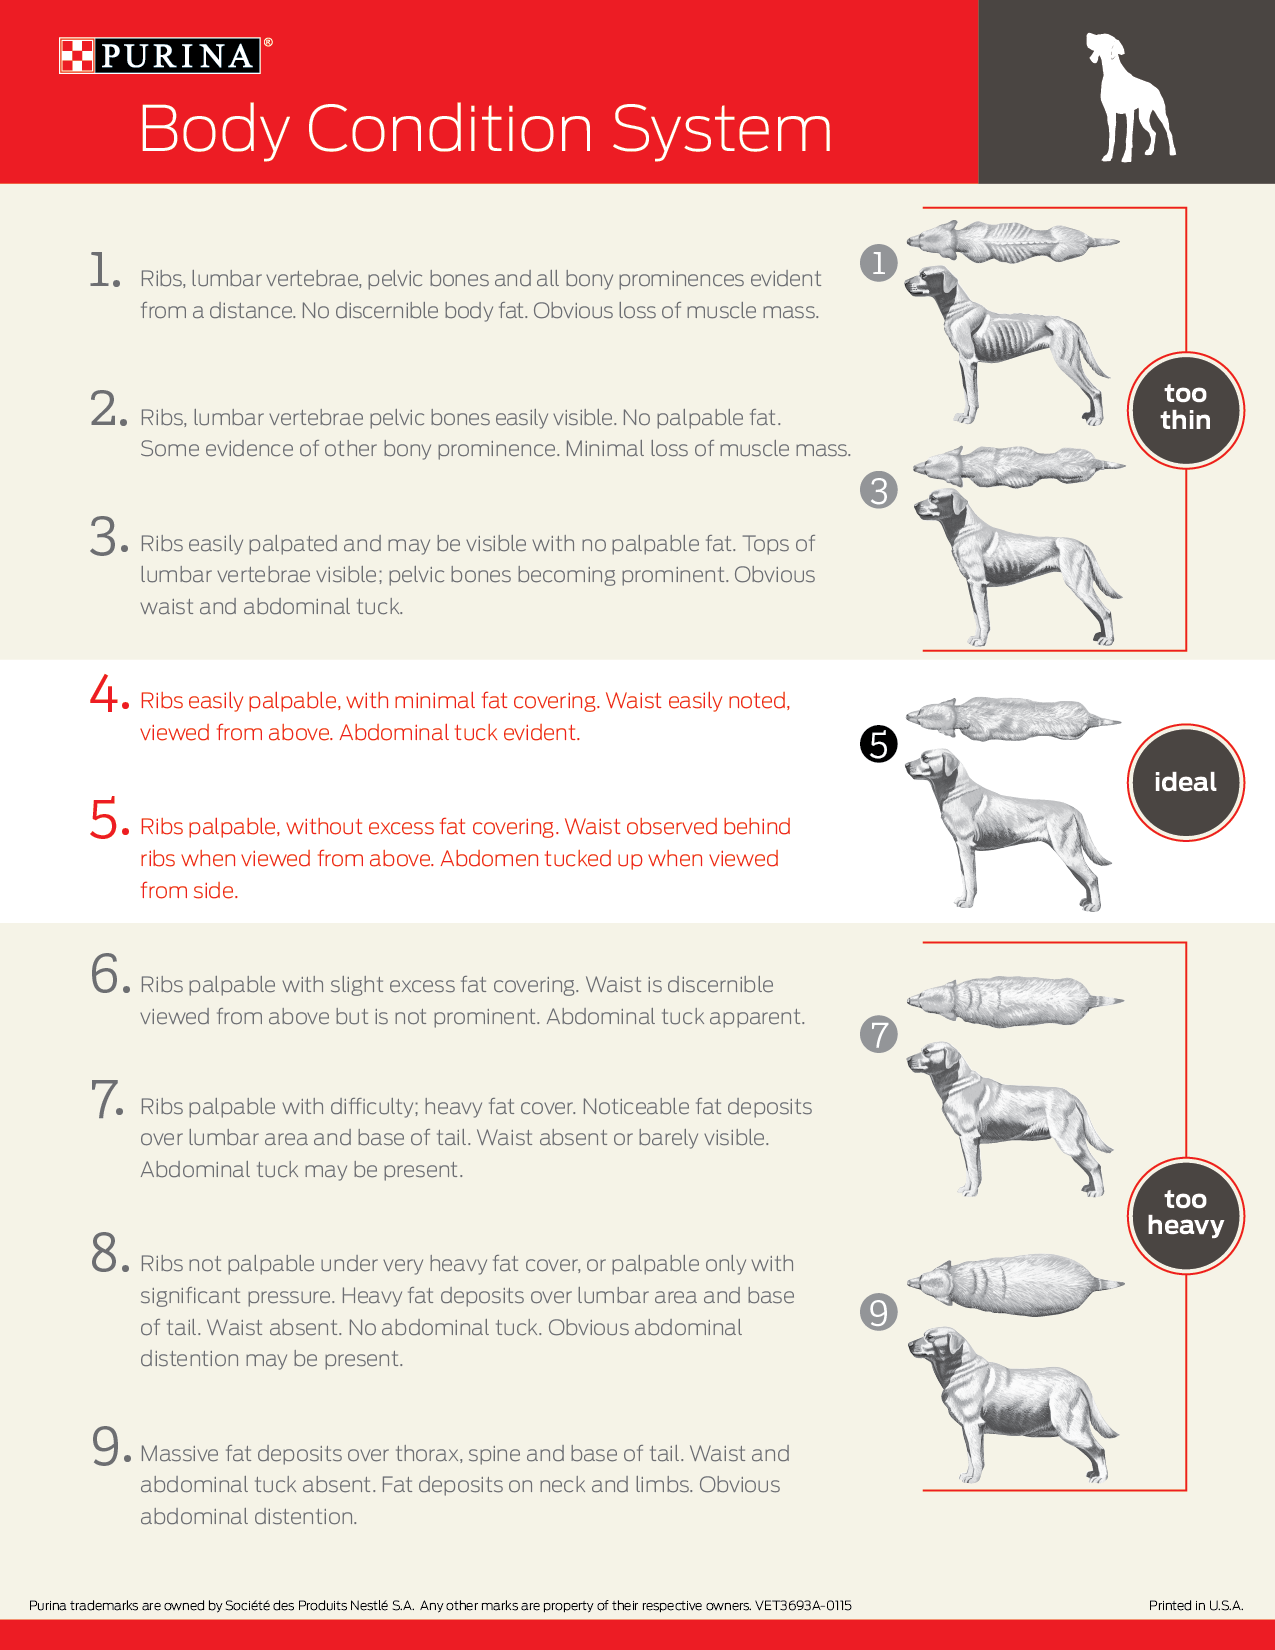 canine body condition score with the title Purina Body Condition Score System